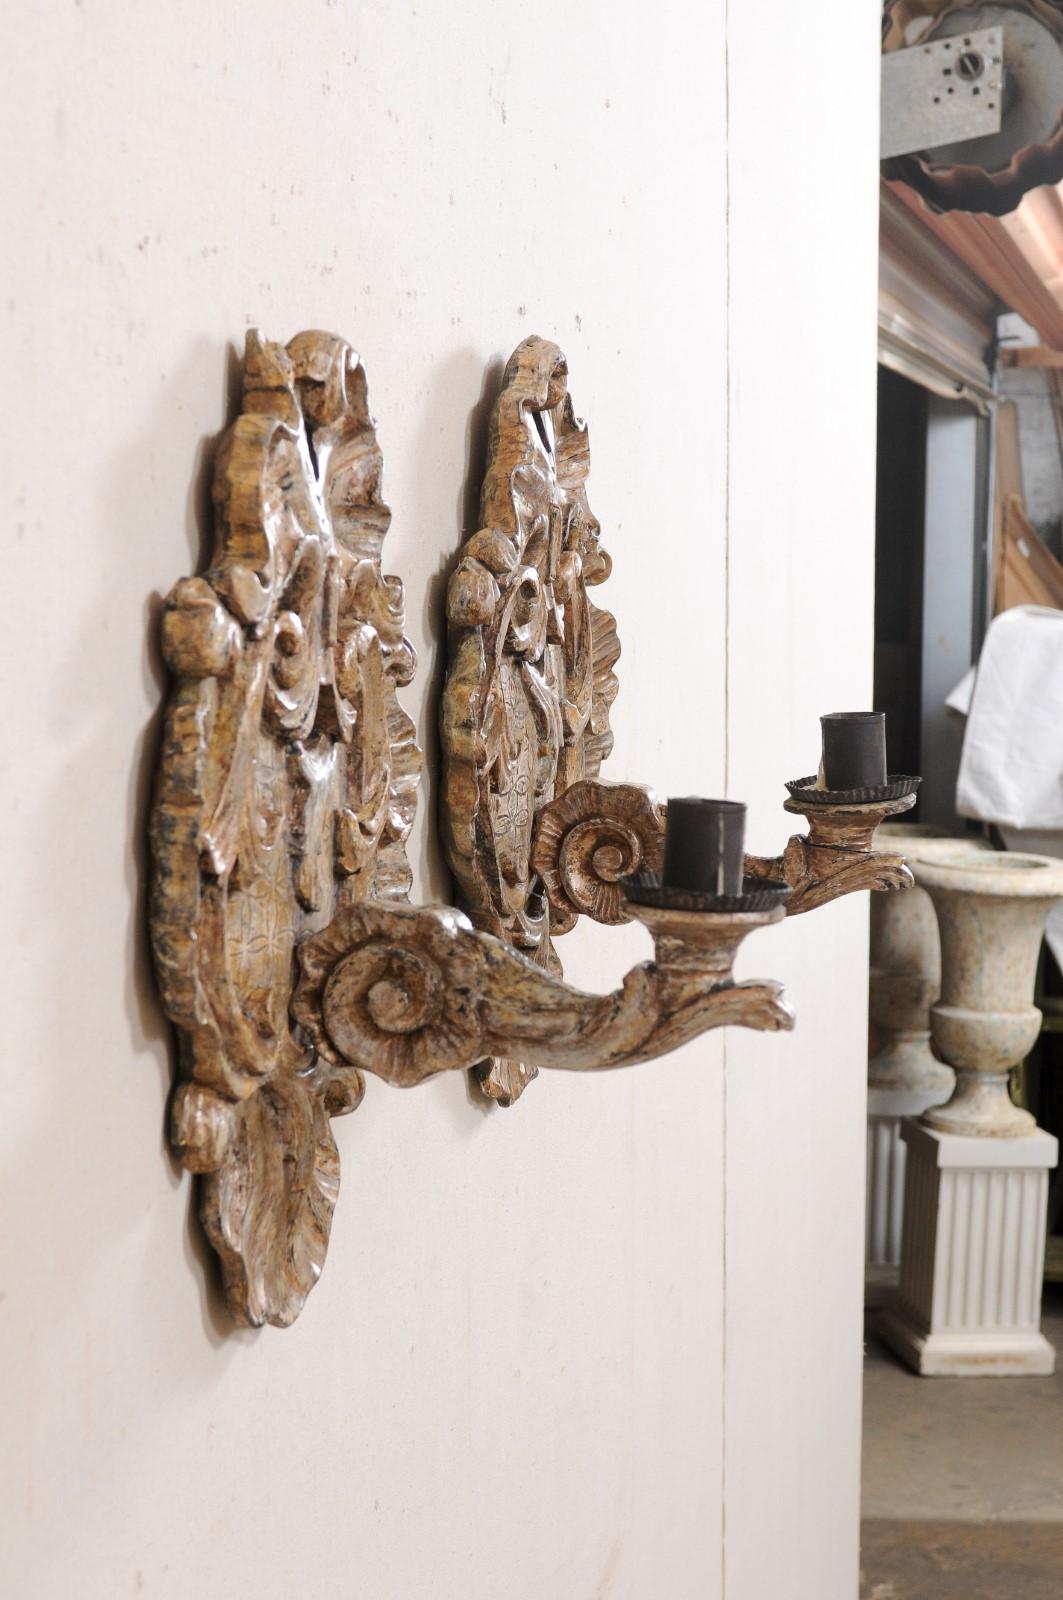 20th Century Antique Pair of Acanthus Leaf-Carved Single-Candle Wall Sconces from Italy For Sale